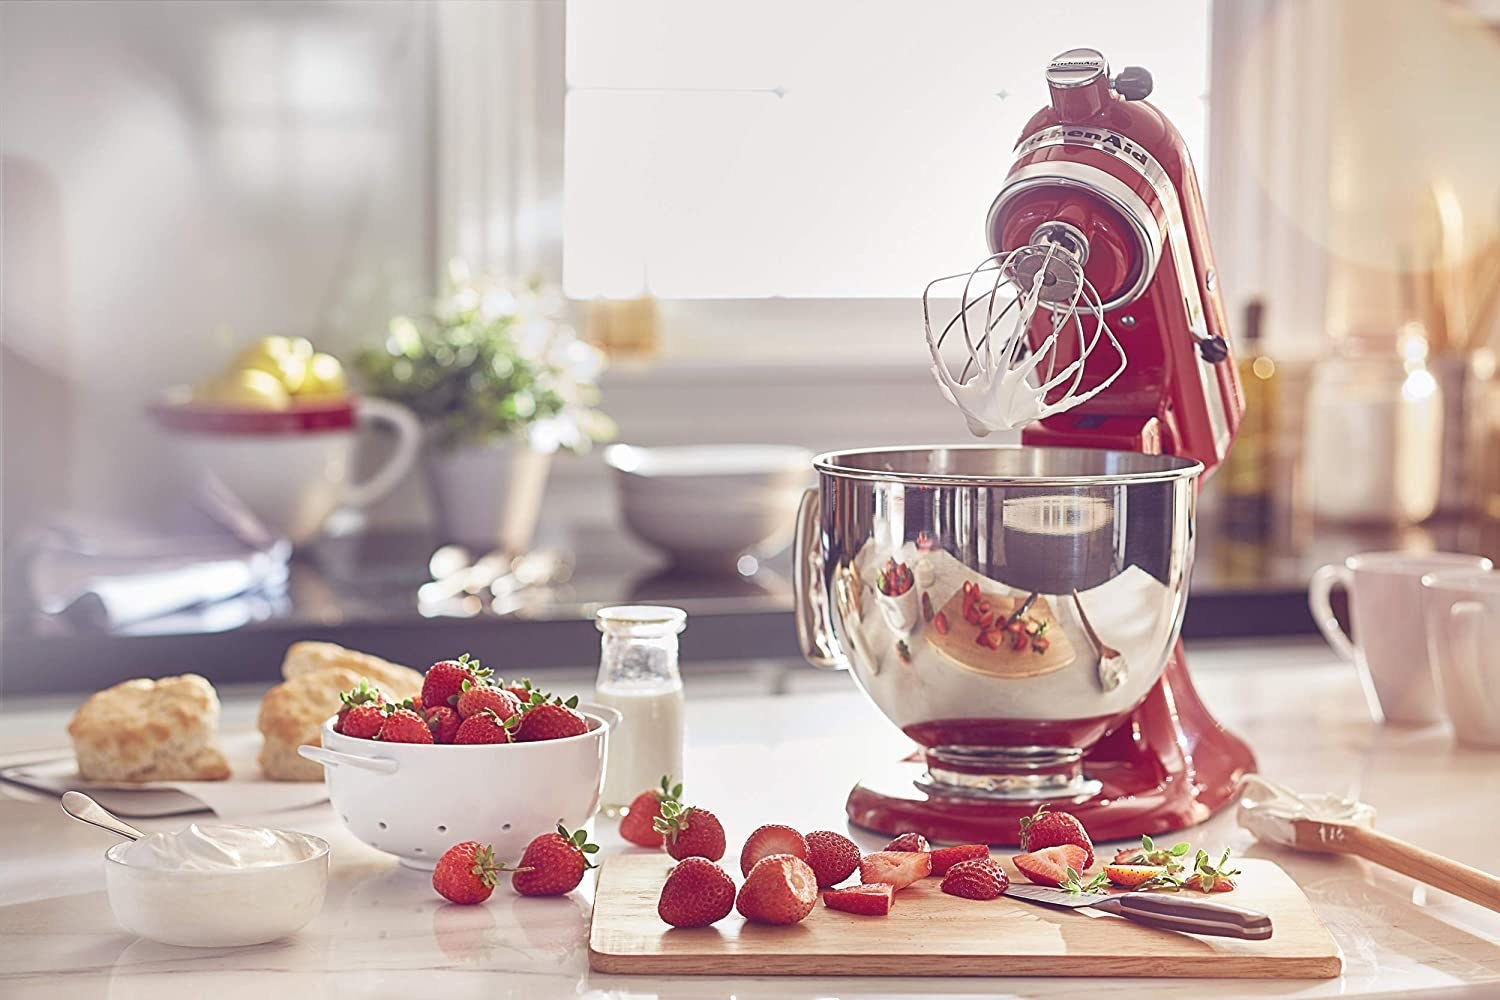 A stand mixer with the head in the upright position surrounded by berries and cream